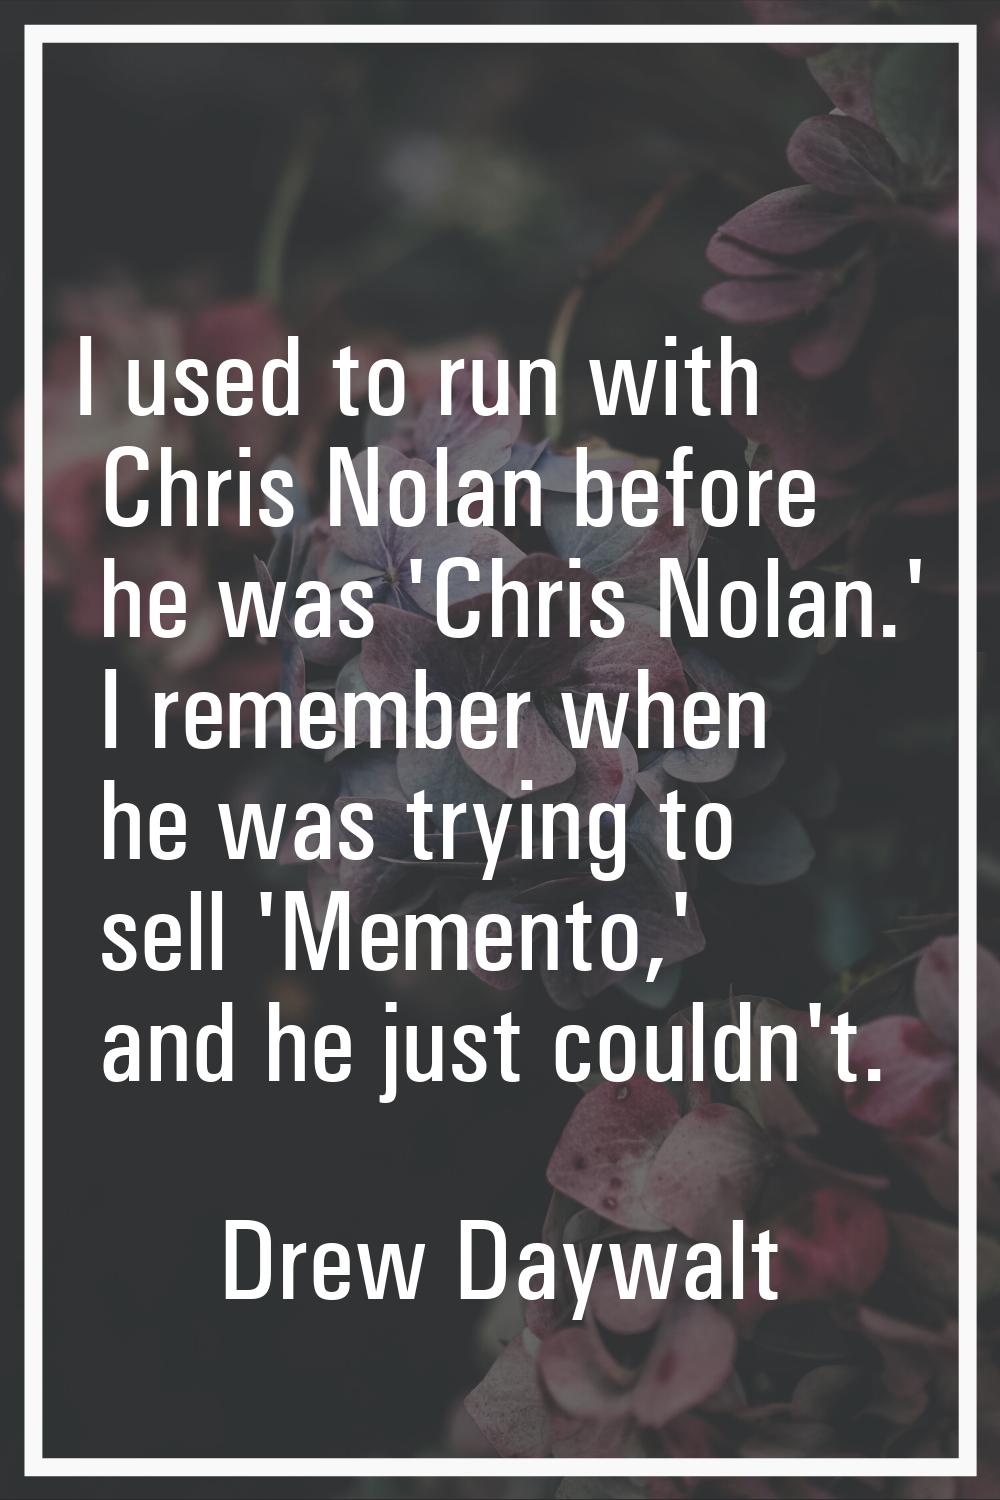 I used to run with Chris Nolan before he was 'Chris Nolan.' I remember when he was trying to sell '